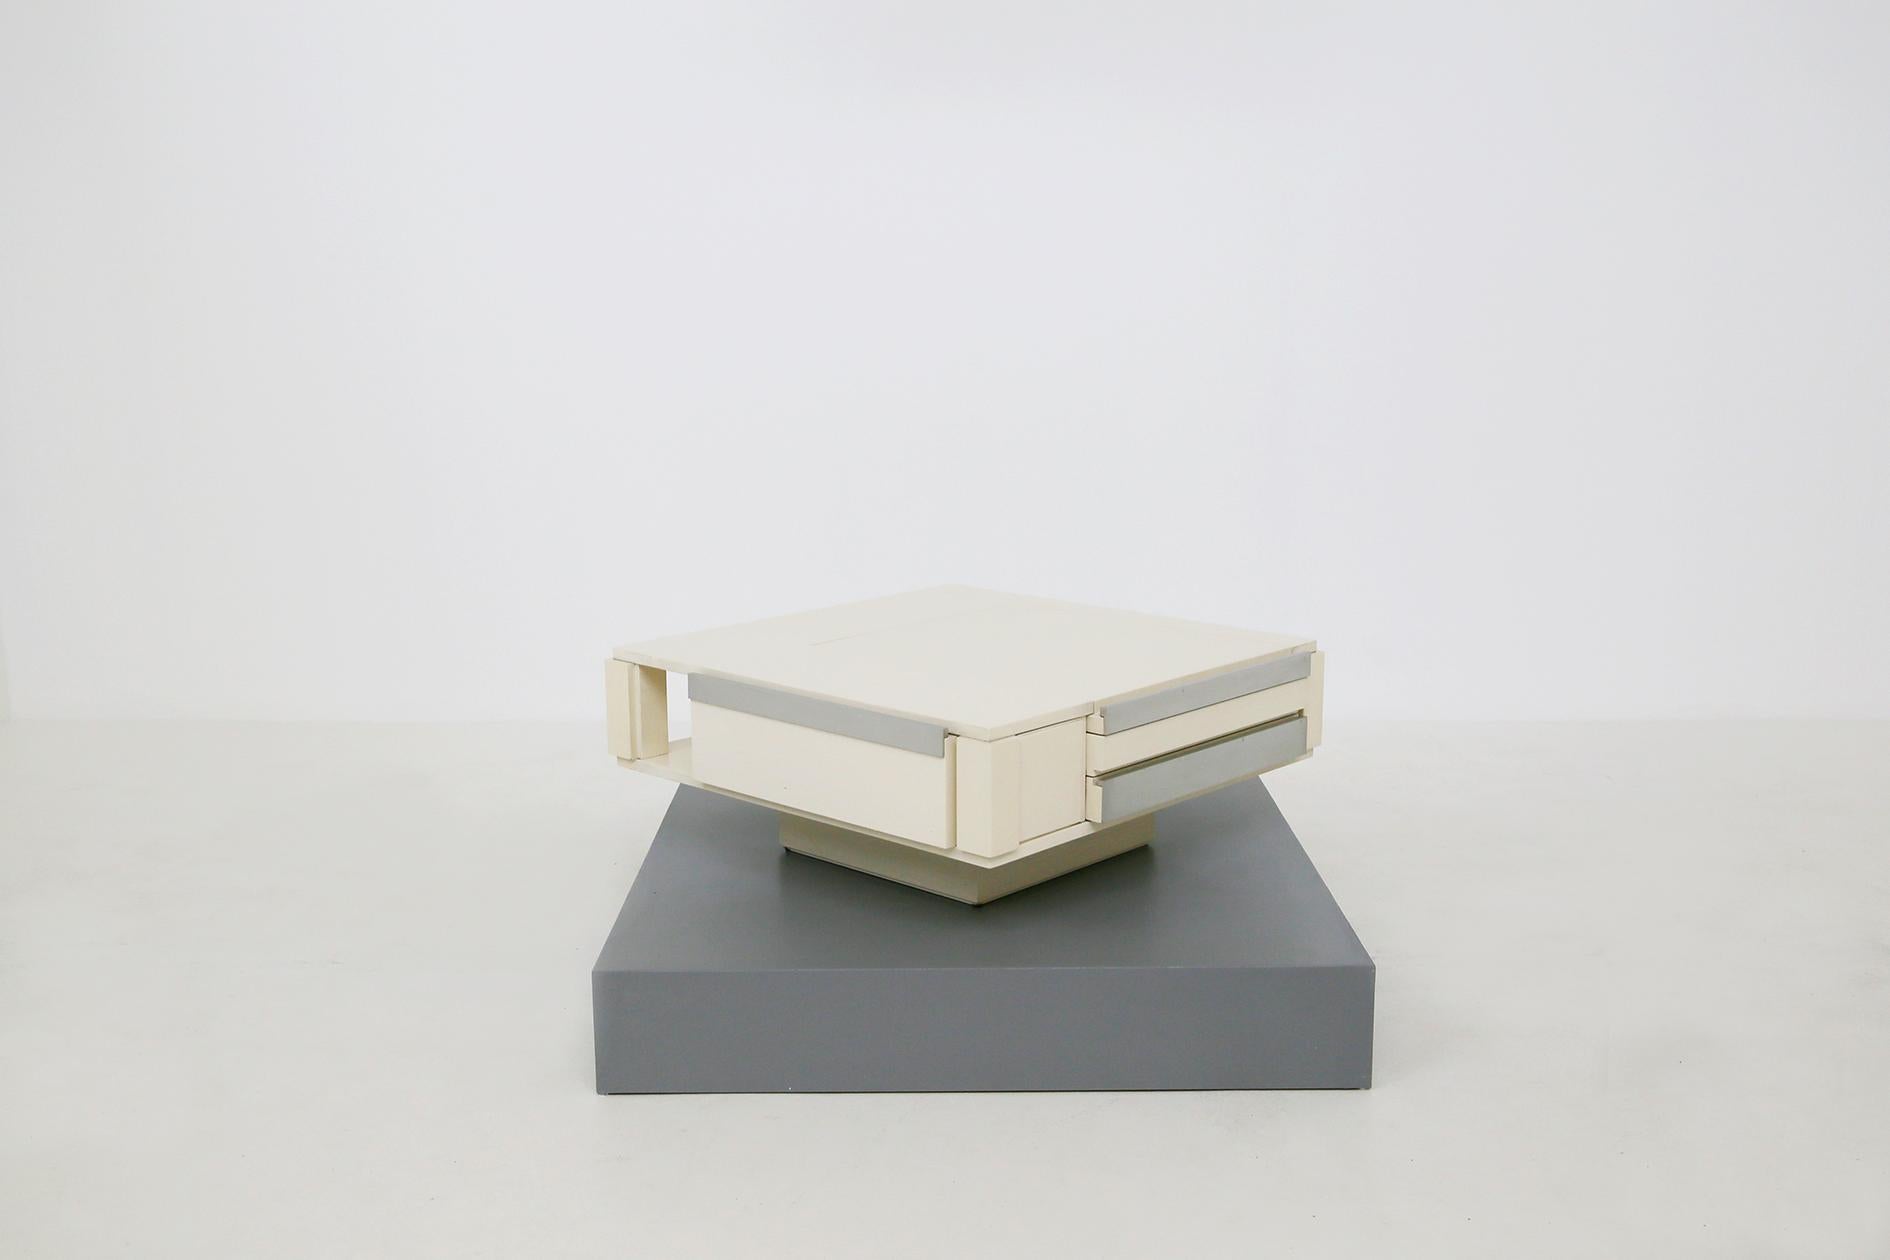 Italian coffee table designed by Cesare Augusto Nava in 1970.
The coffee table is a prototype of the small collection Design by Cesare Augusto Nava and is accompanied by a Certificate of Authenticity.
Nava's training was forged by the great